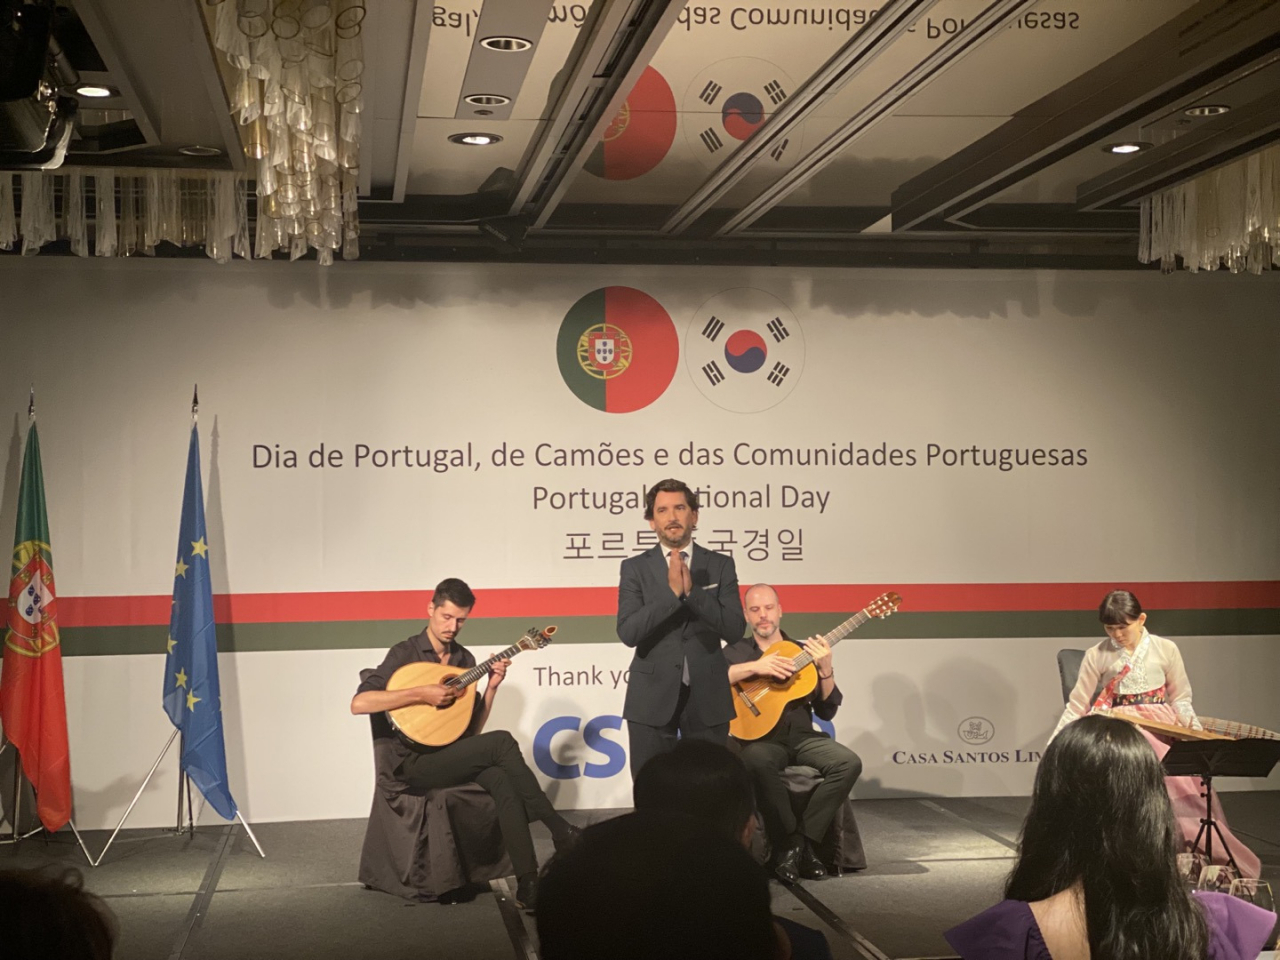 Artists perfom during the celebration of Portugal National Day at Four Seasons Hotel in Jung-g, Seoul on Monday. (Sanjay Kumar/The Korea Herald)